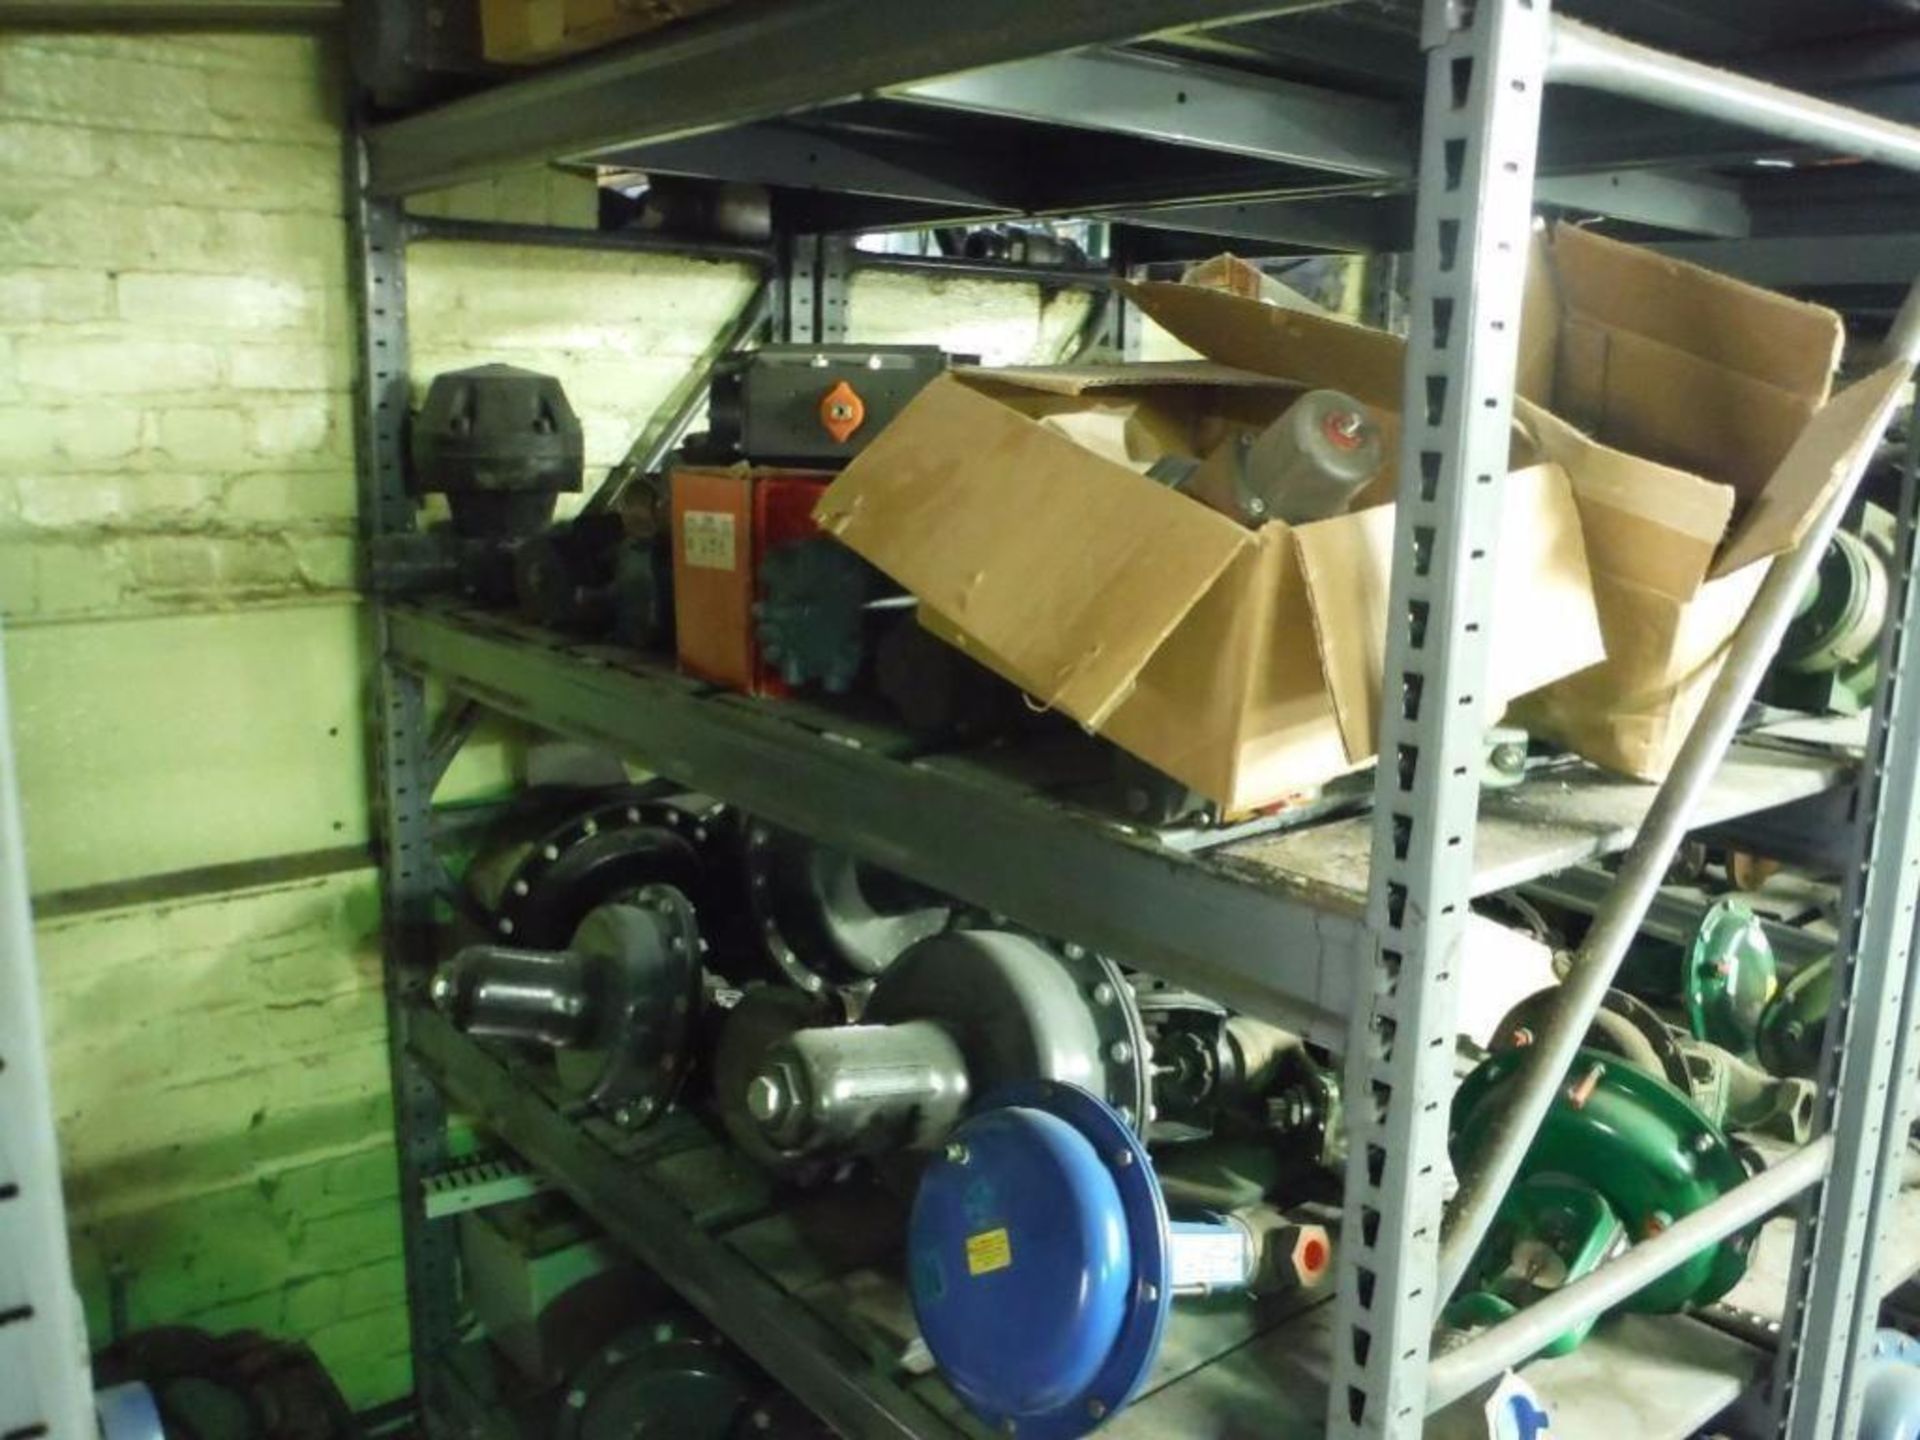 10 Shelves & content: Miscellaneous valves, fittings, brushes, and parts  Rigging Fee: $1000 - Image 10 of 14